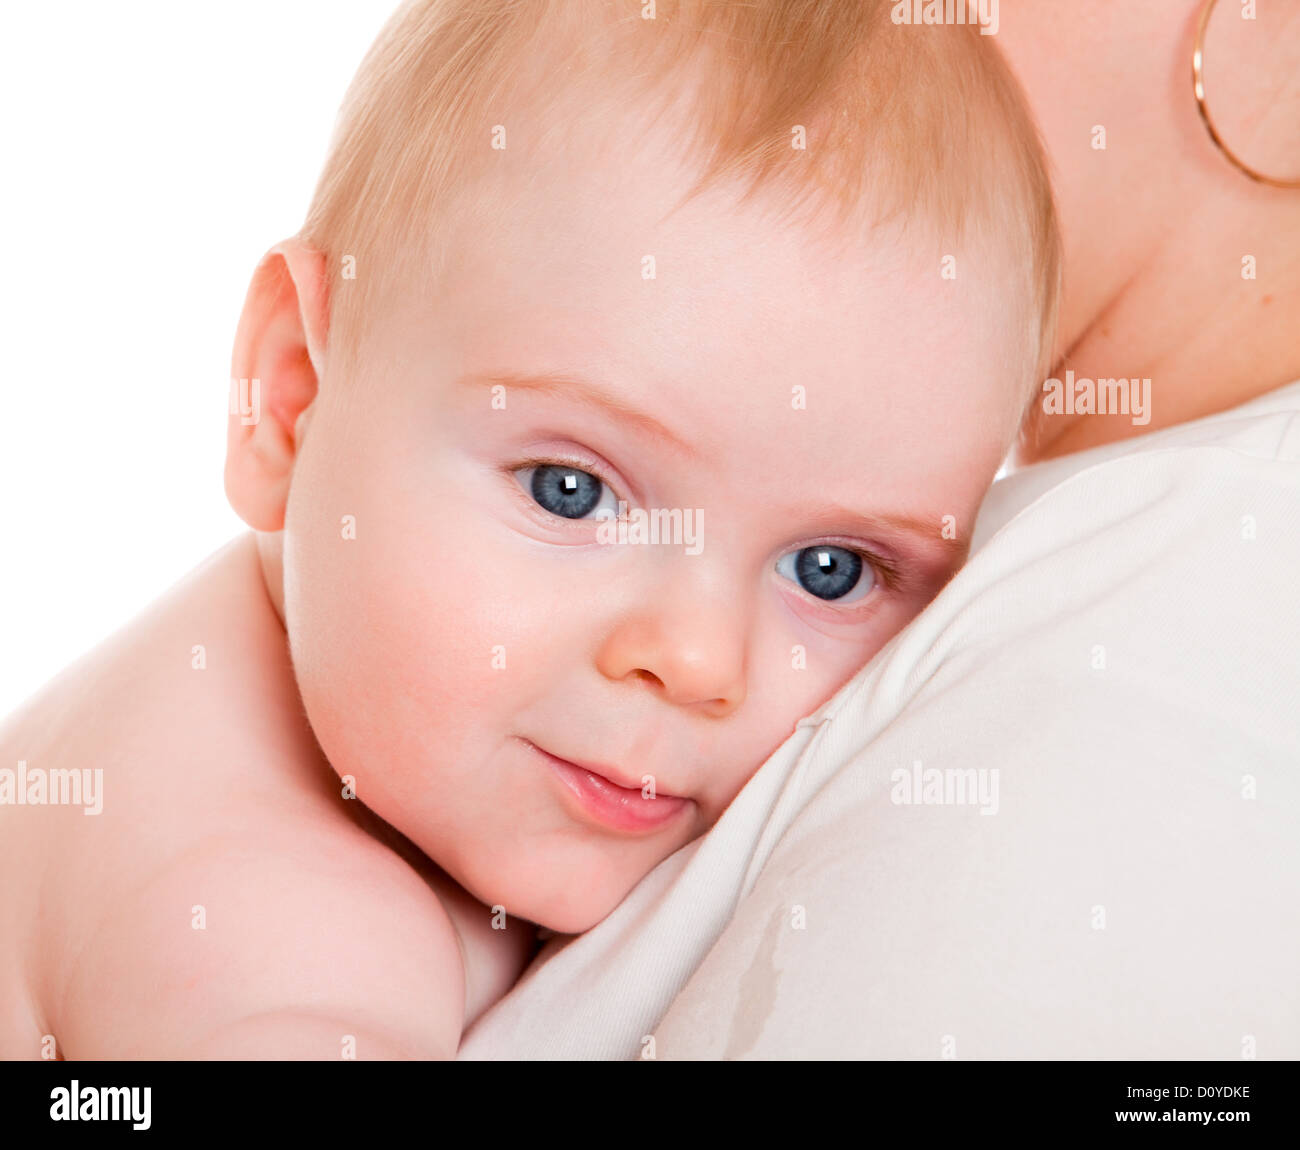 baby on a shoulder at mum Stock Photo